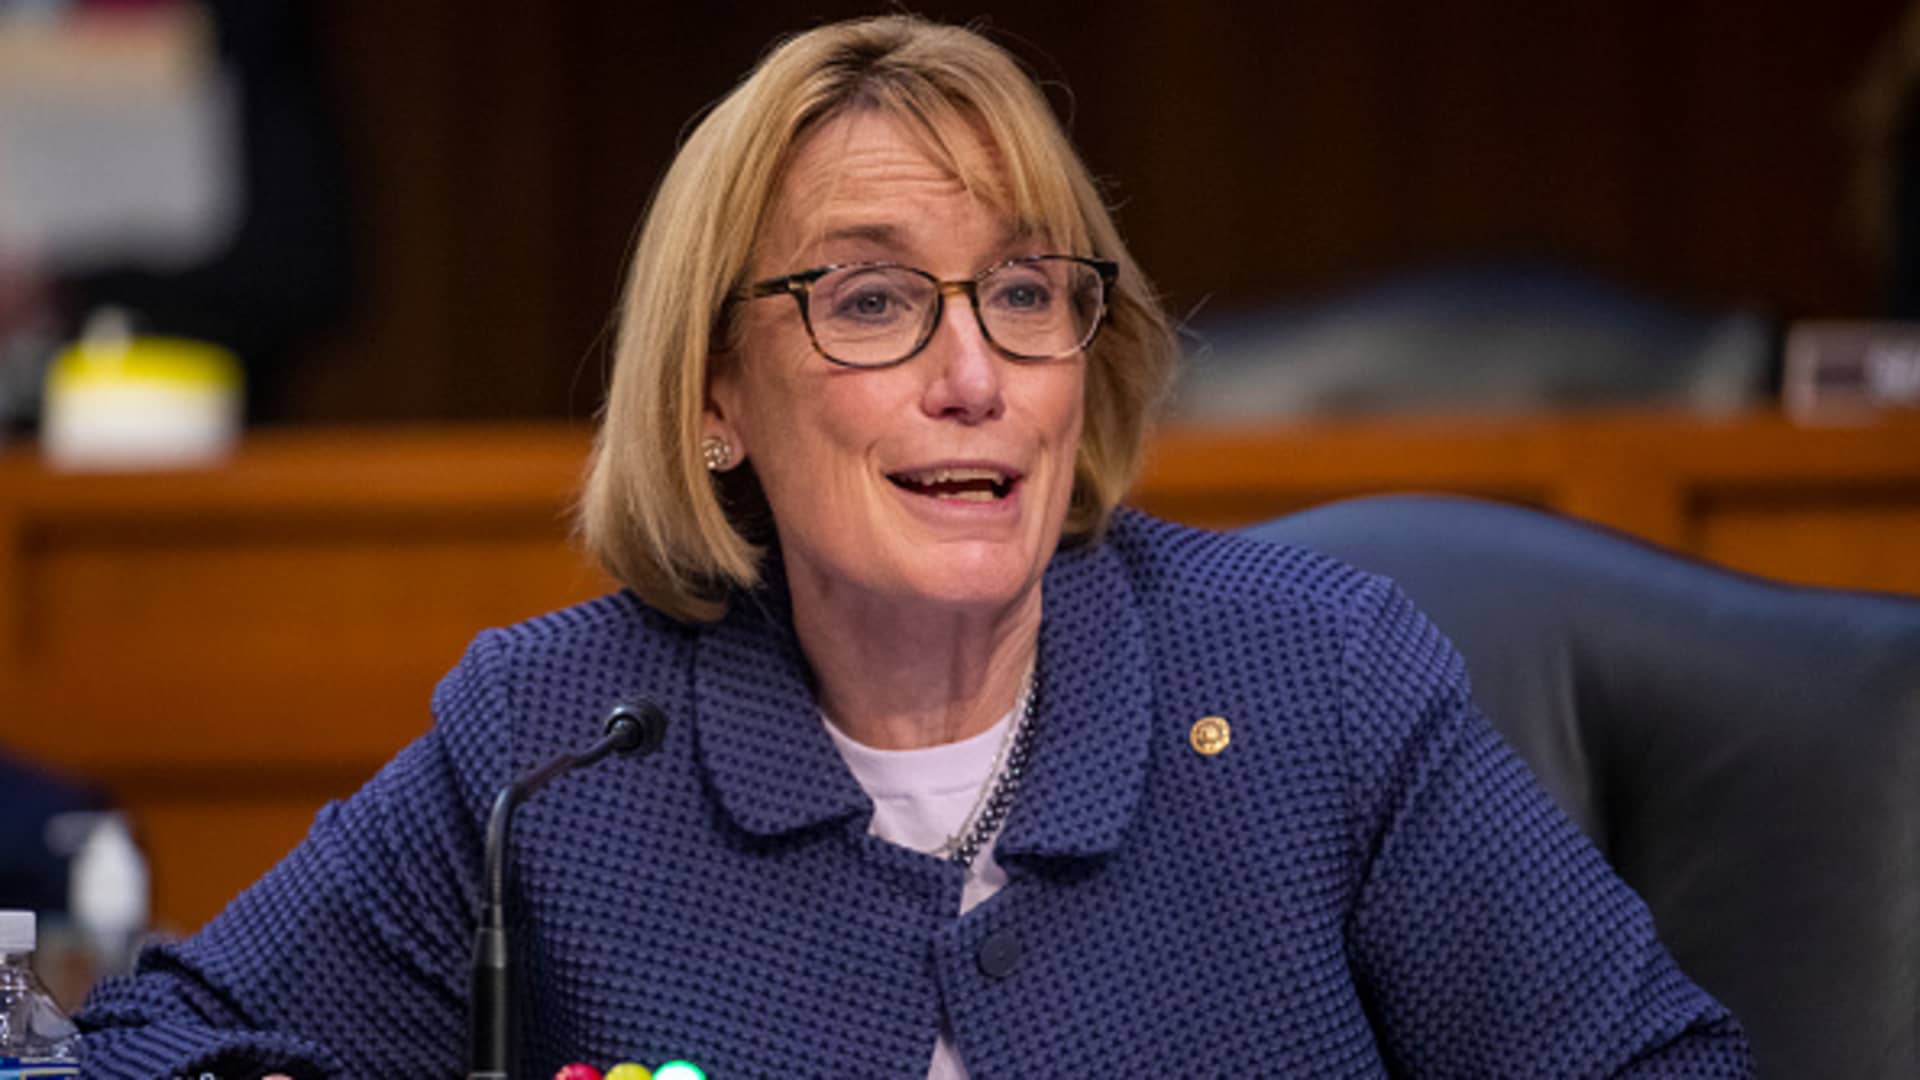 Sen. Maggie Hassan (D-NH) questions Secretary of Education Miguel Cardona during a Senate Health, Education, Labor, and Pensions Committee hearing to discuss reopening schools during the COVID-19 pandemic on Capitol Hill on September 30, 2021 in Washington, DC.